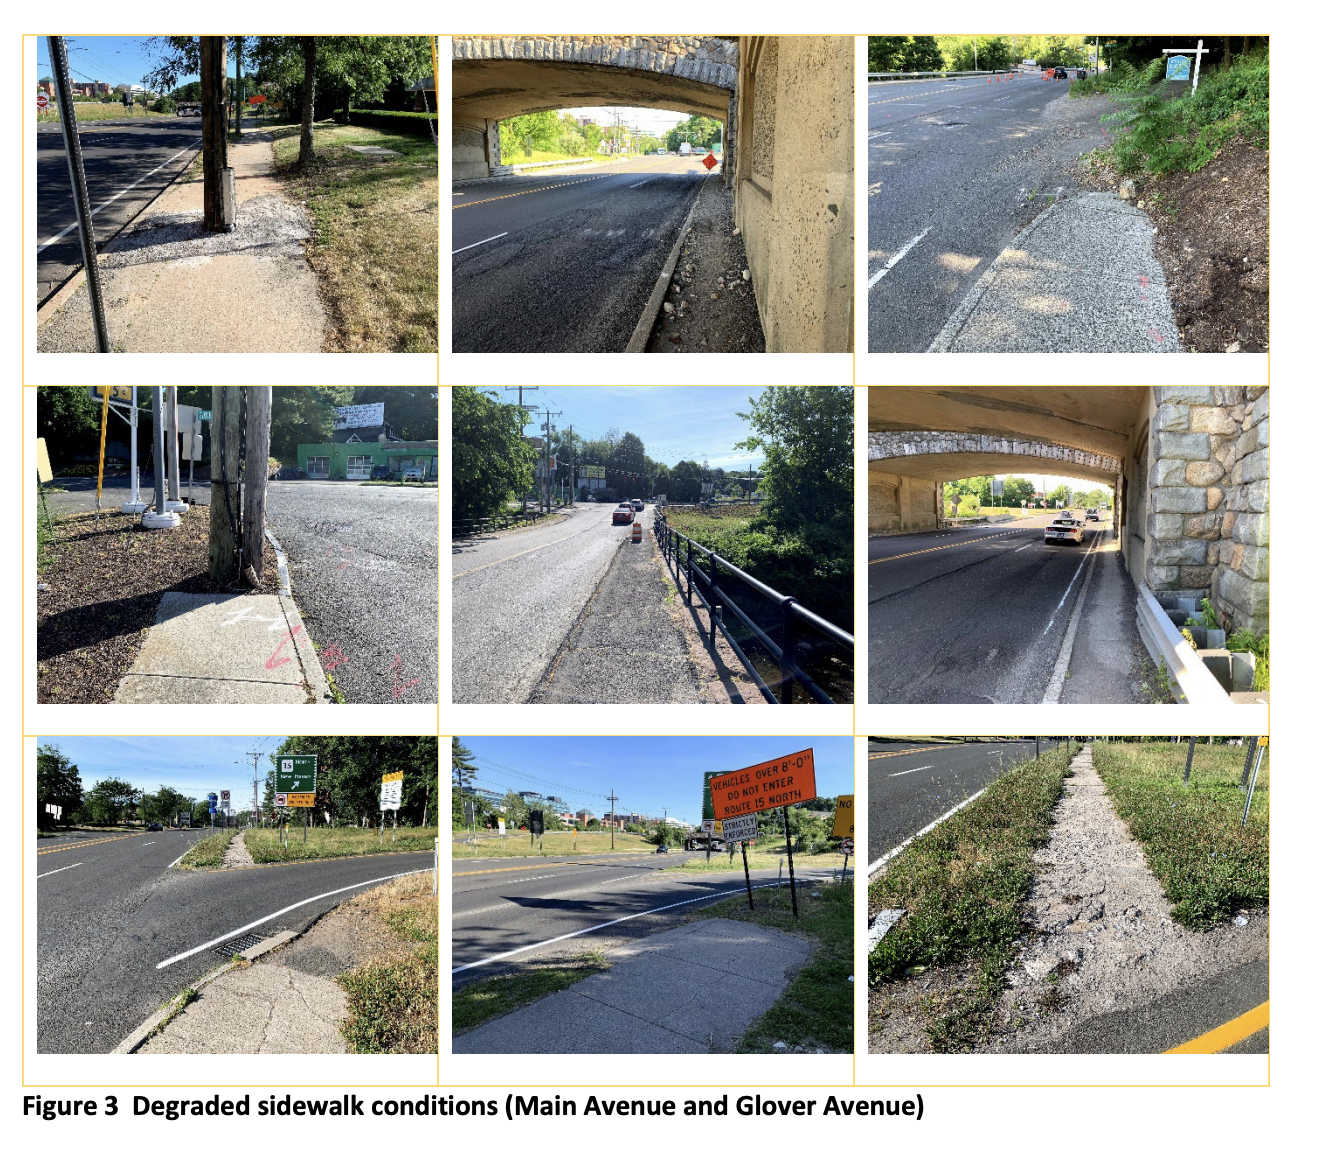 Photos showing bad sidewalks along Main Avenue and Glover Avenue